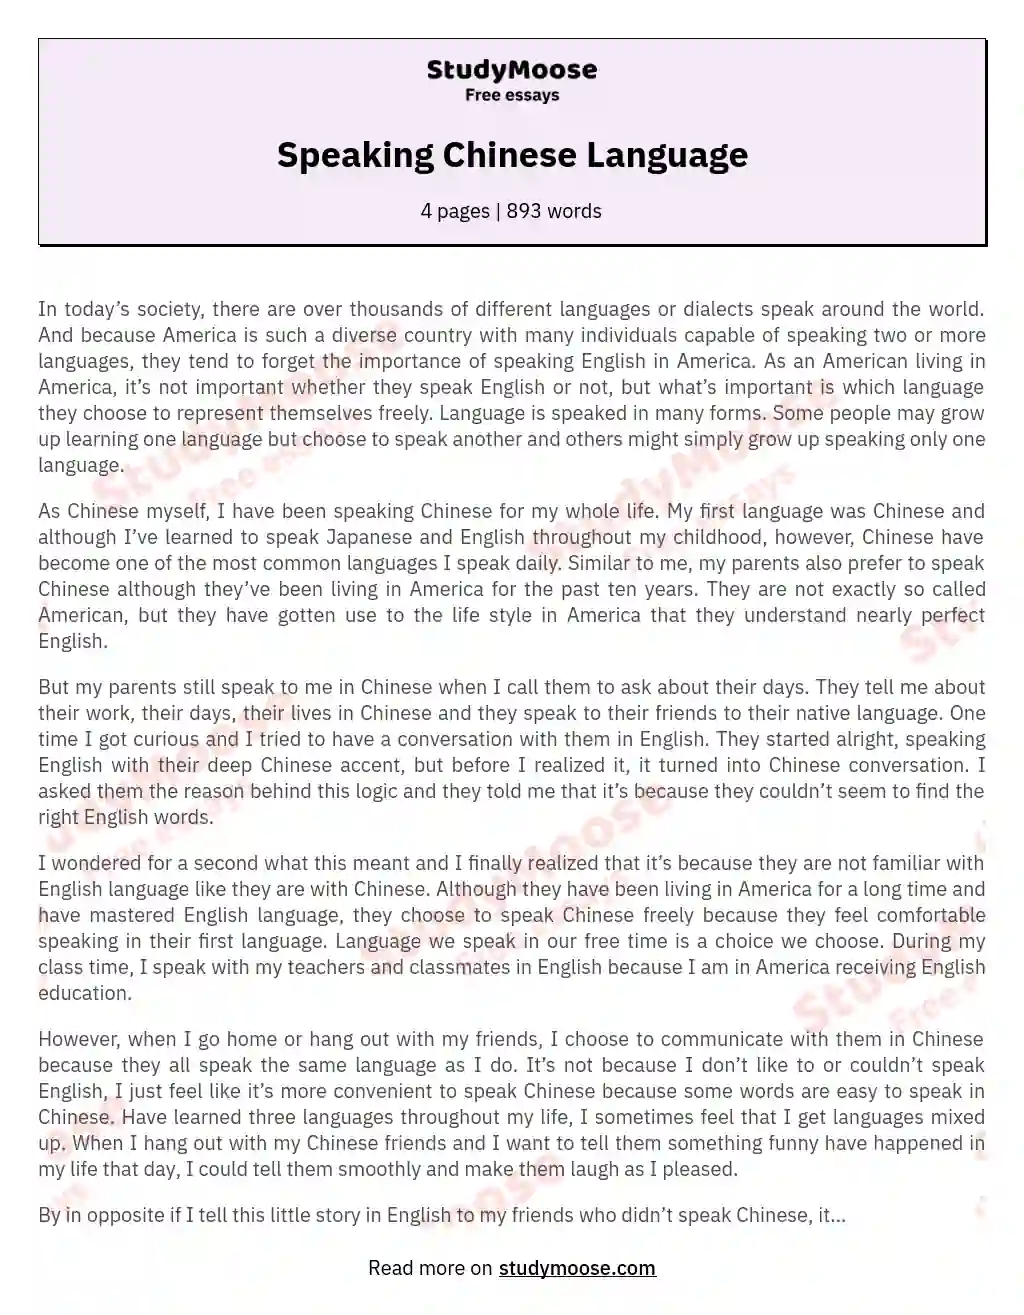 chinese extended essay examples